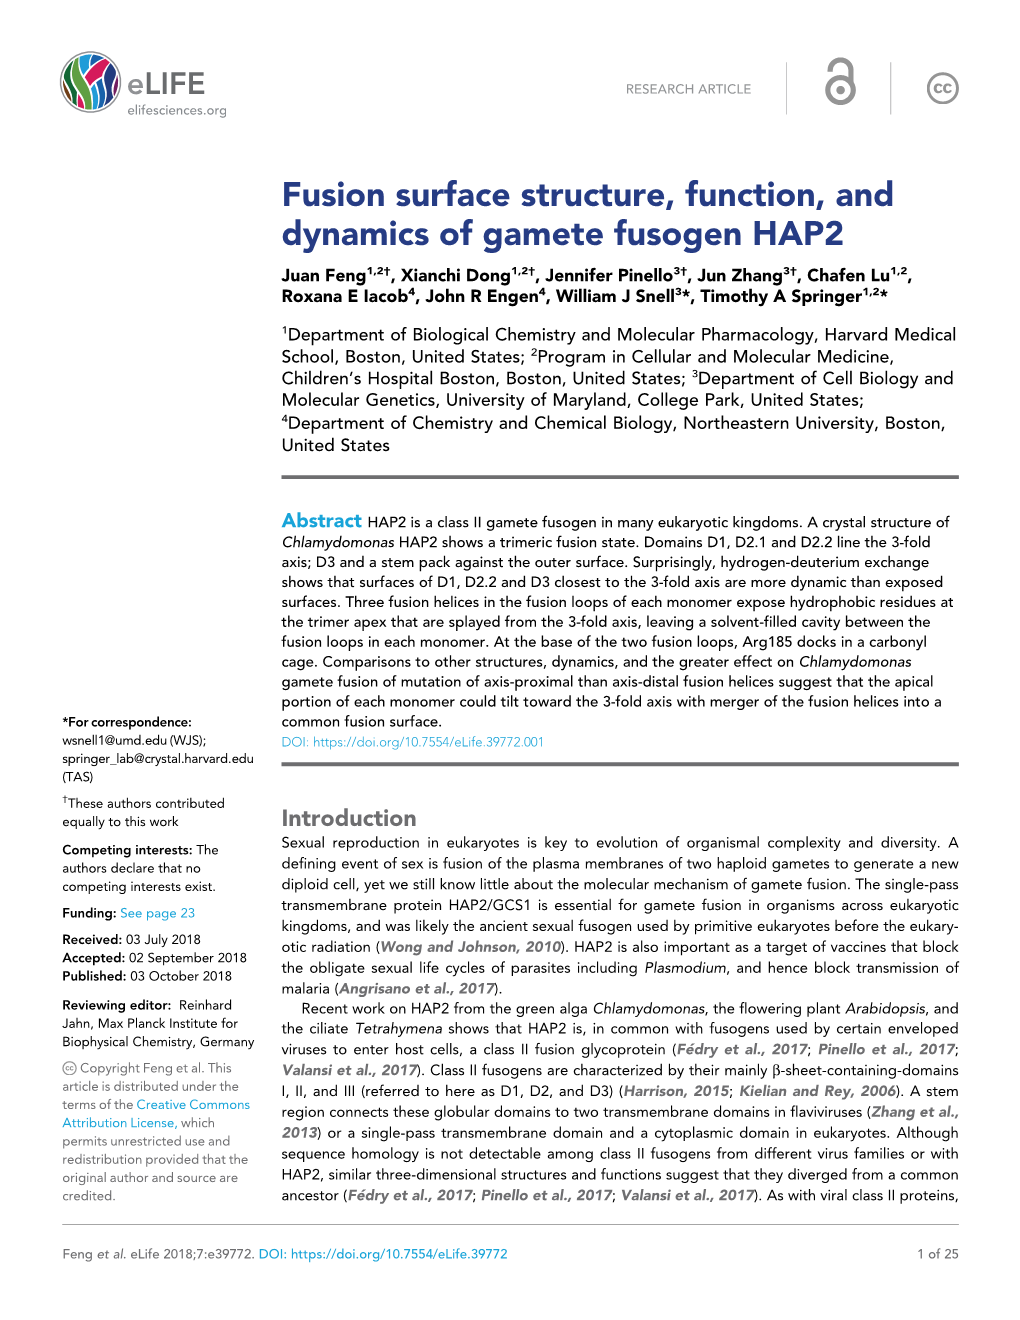 Fusion Surface Structure, Function, and Dynamics of Gamete Fusogen HAP2